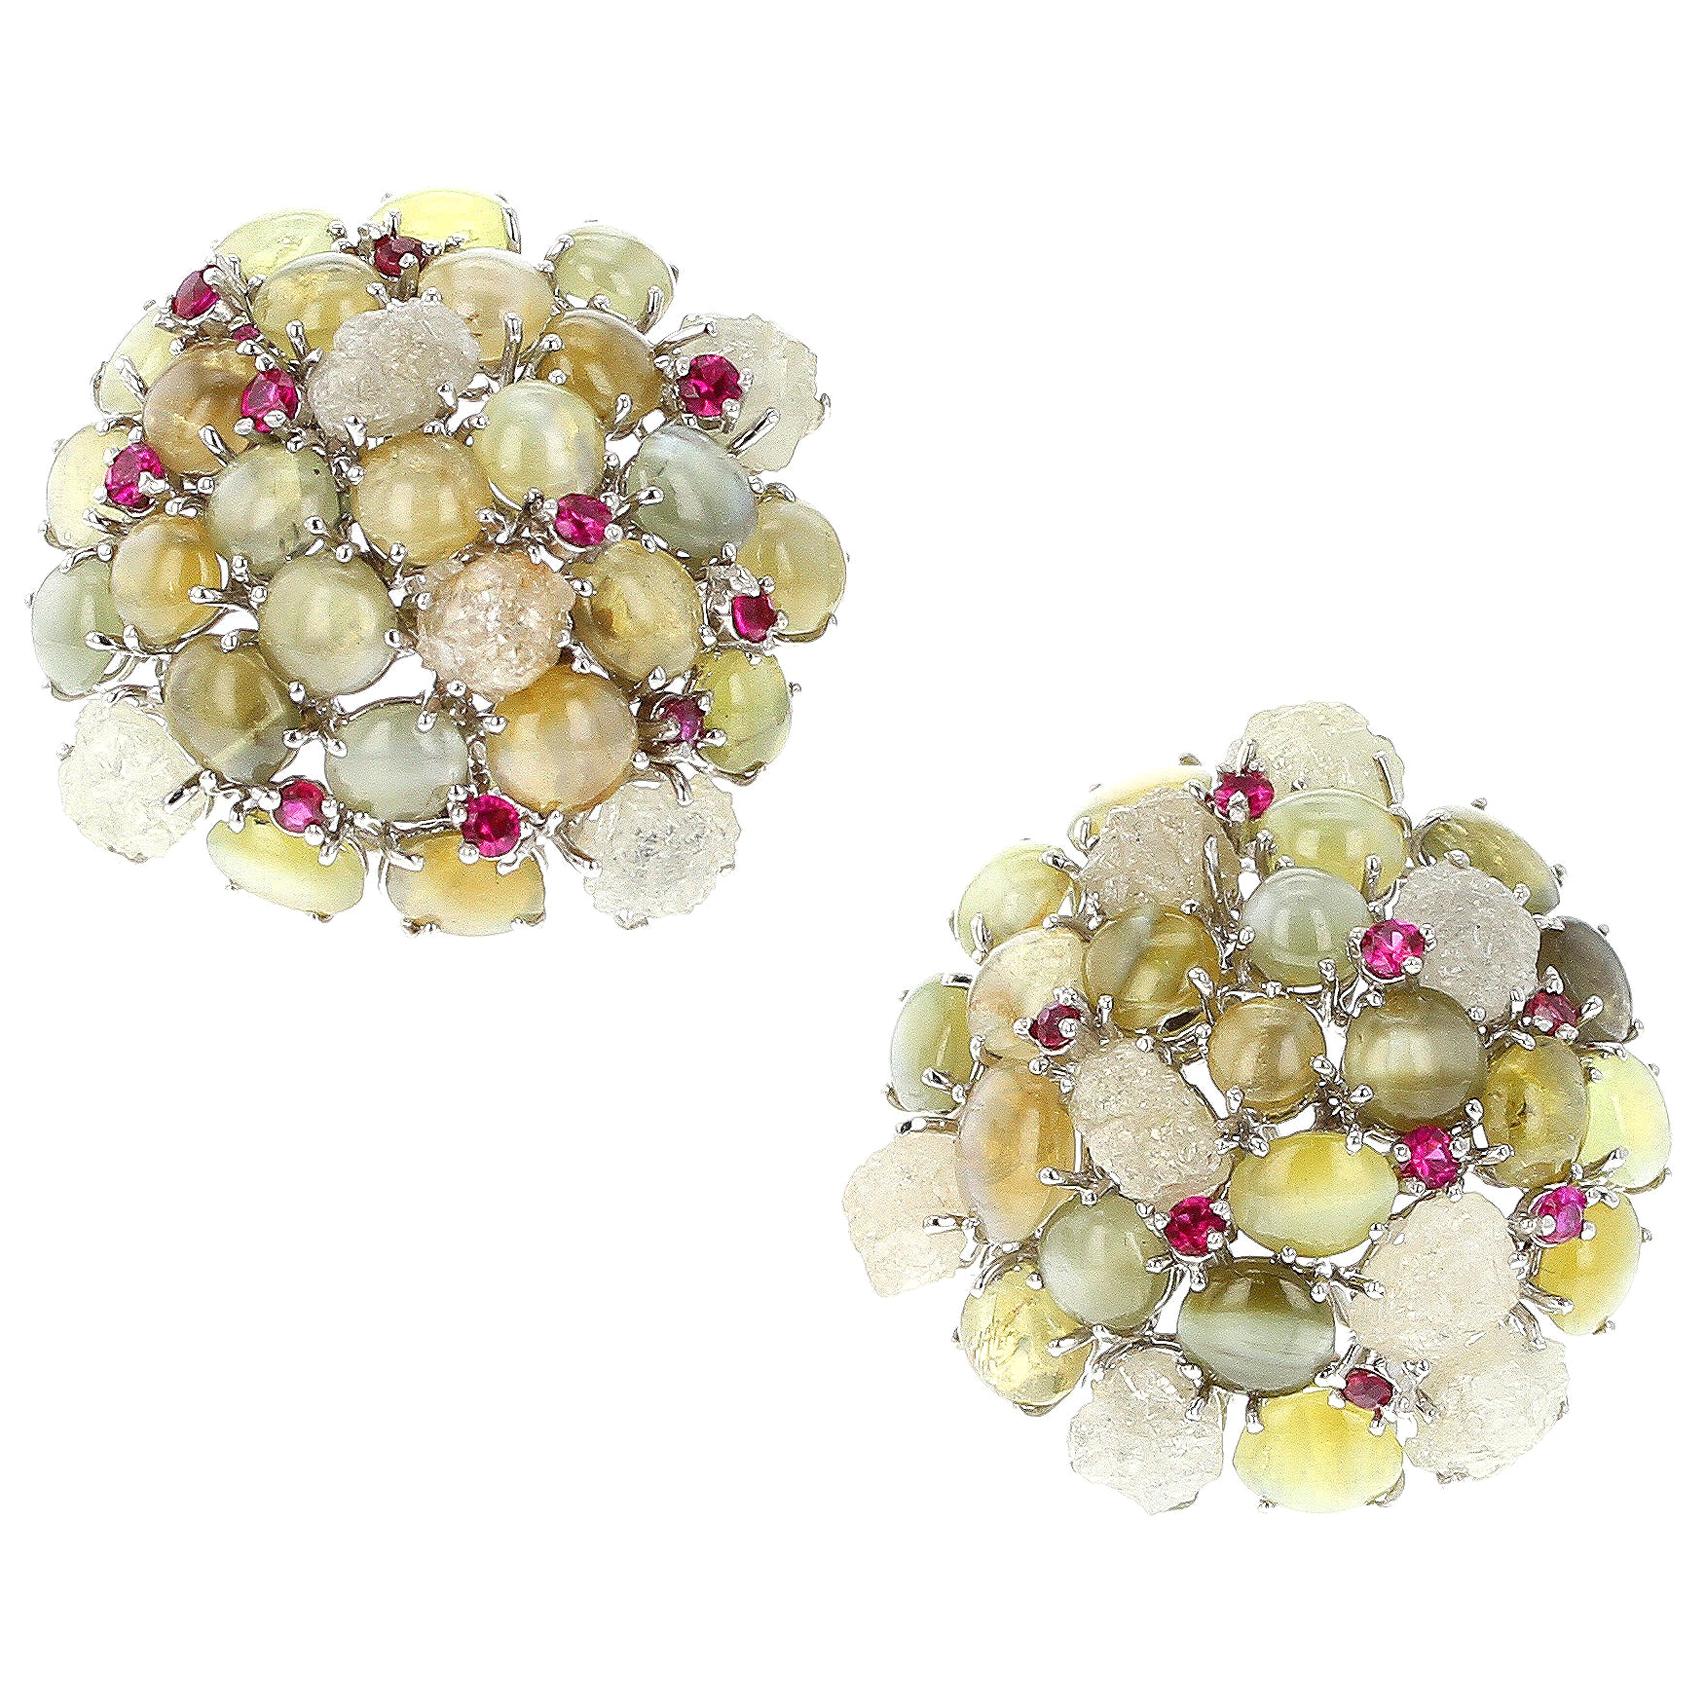 Cat’s Eye Chrysoberyl Earrings with Rough Diamonds and Rubies, 18 Karat Gold For Sale